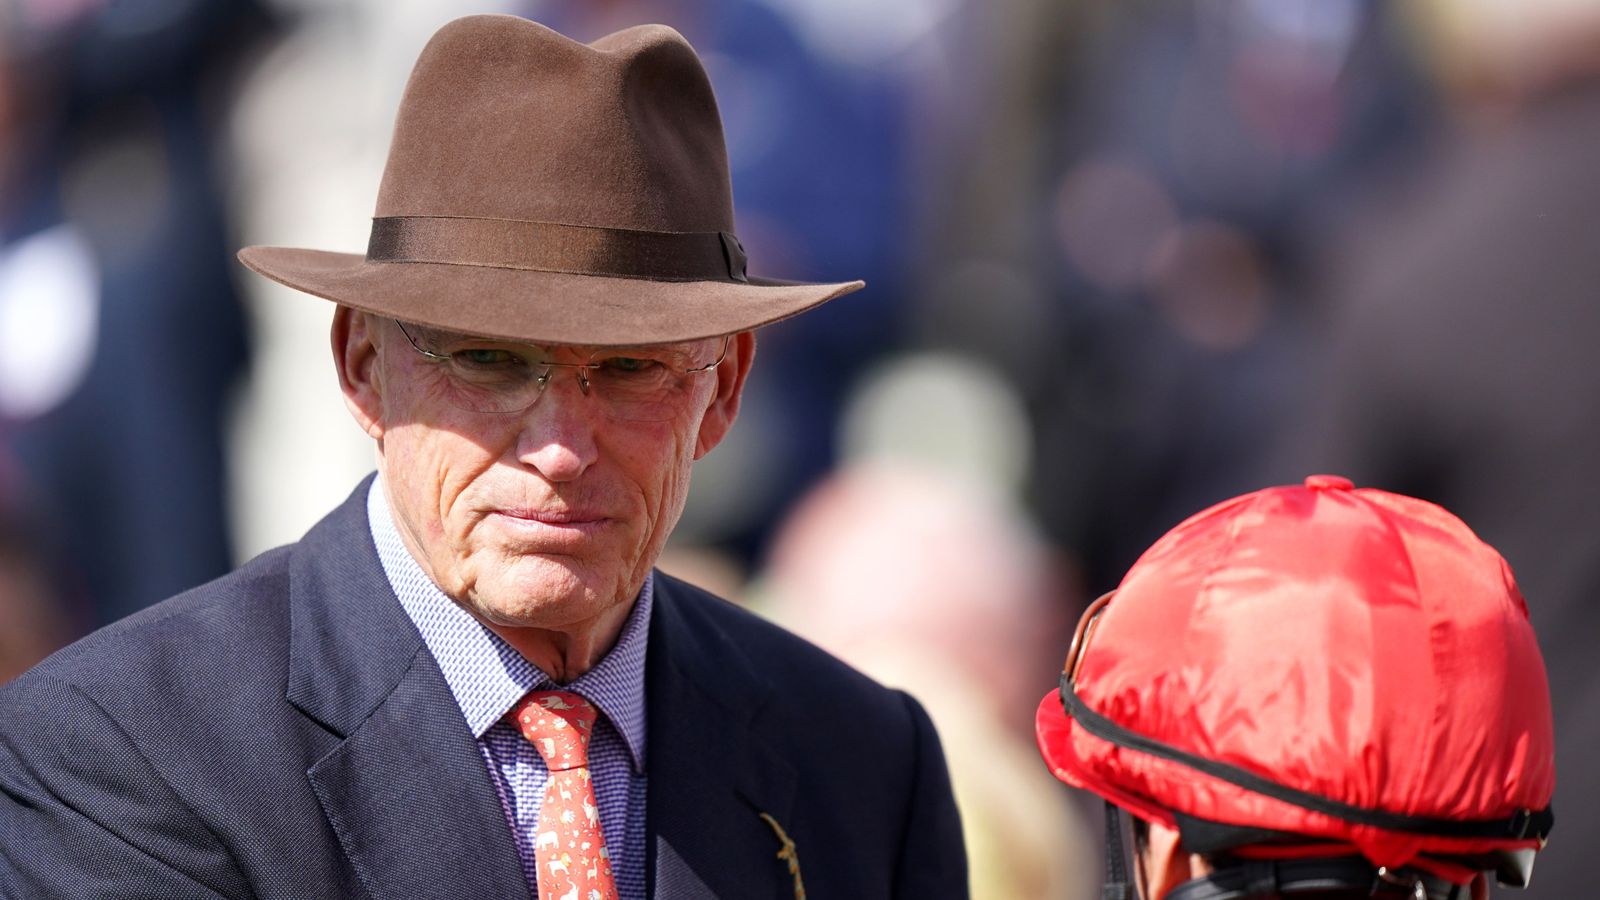 John and Thady Gosden stable tour: Bidding for more Royal Ascot success with Stradivarius, Inspiral and more